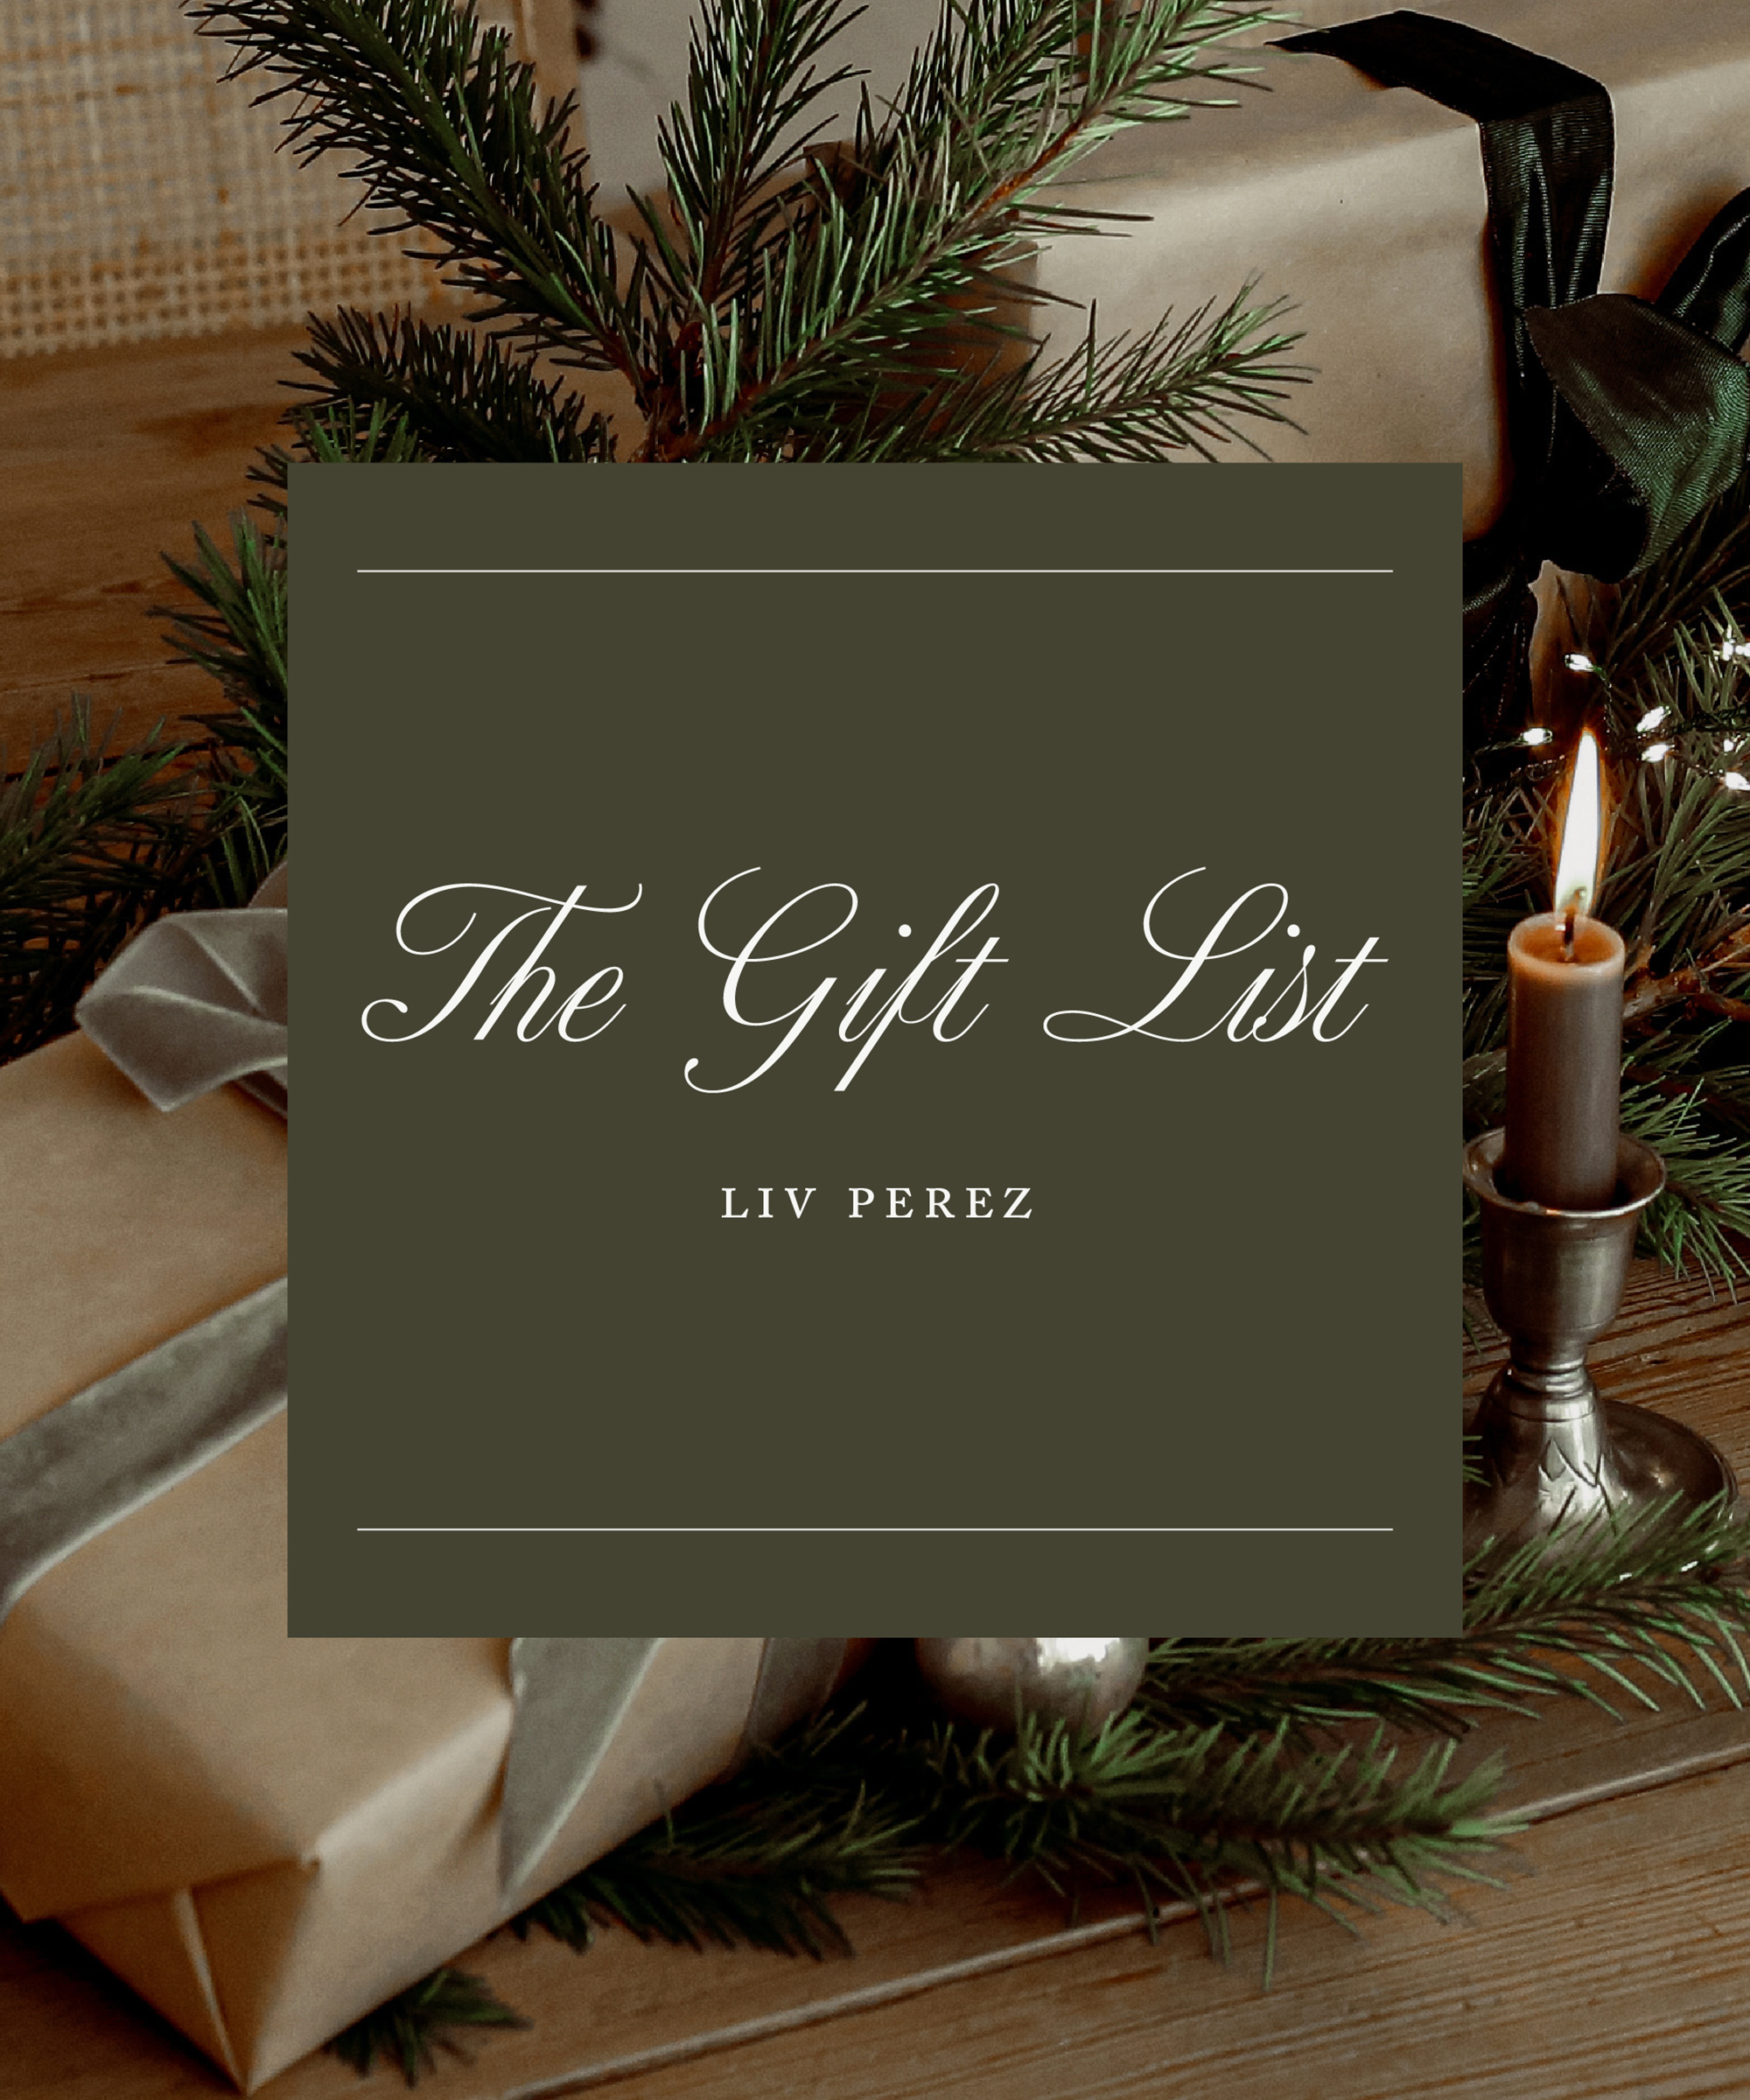 Holiday Gift Guide for Men - Two Peas & Their Pod